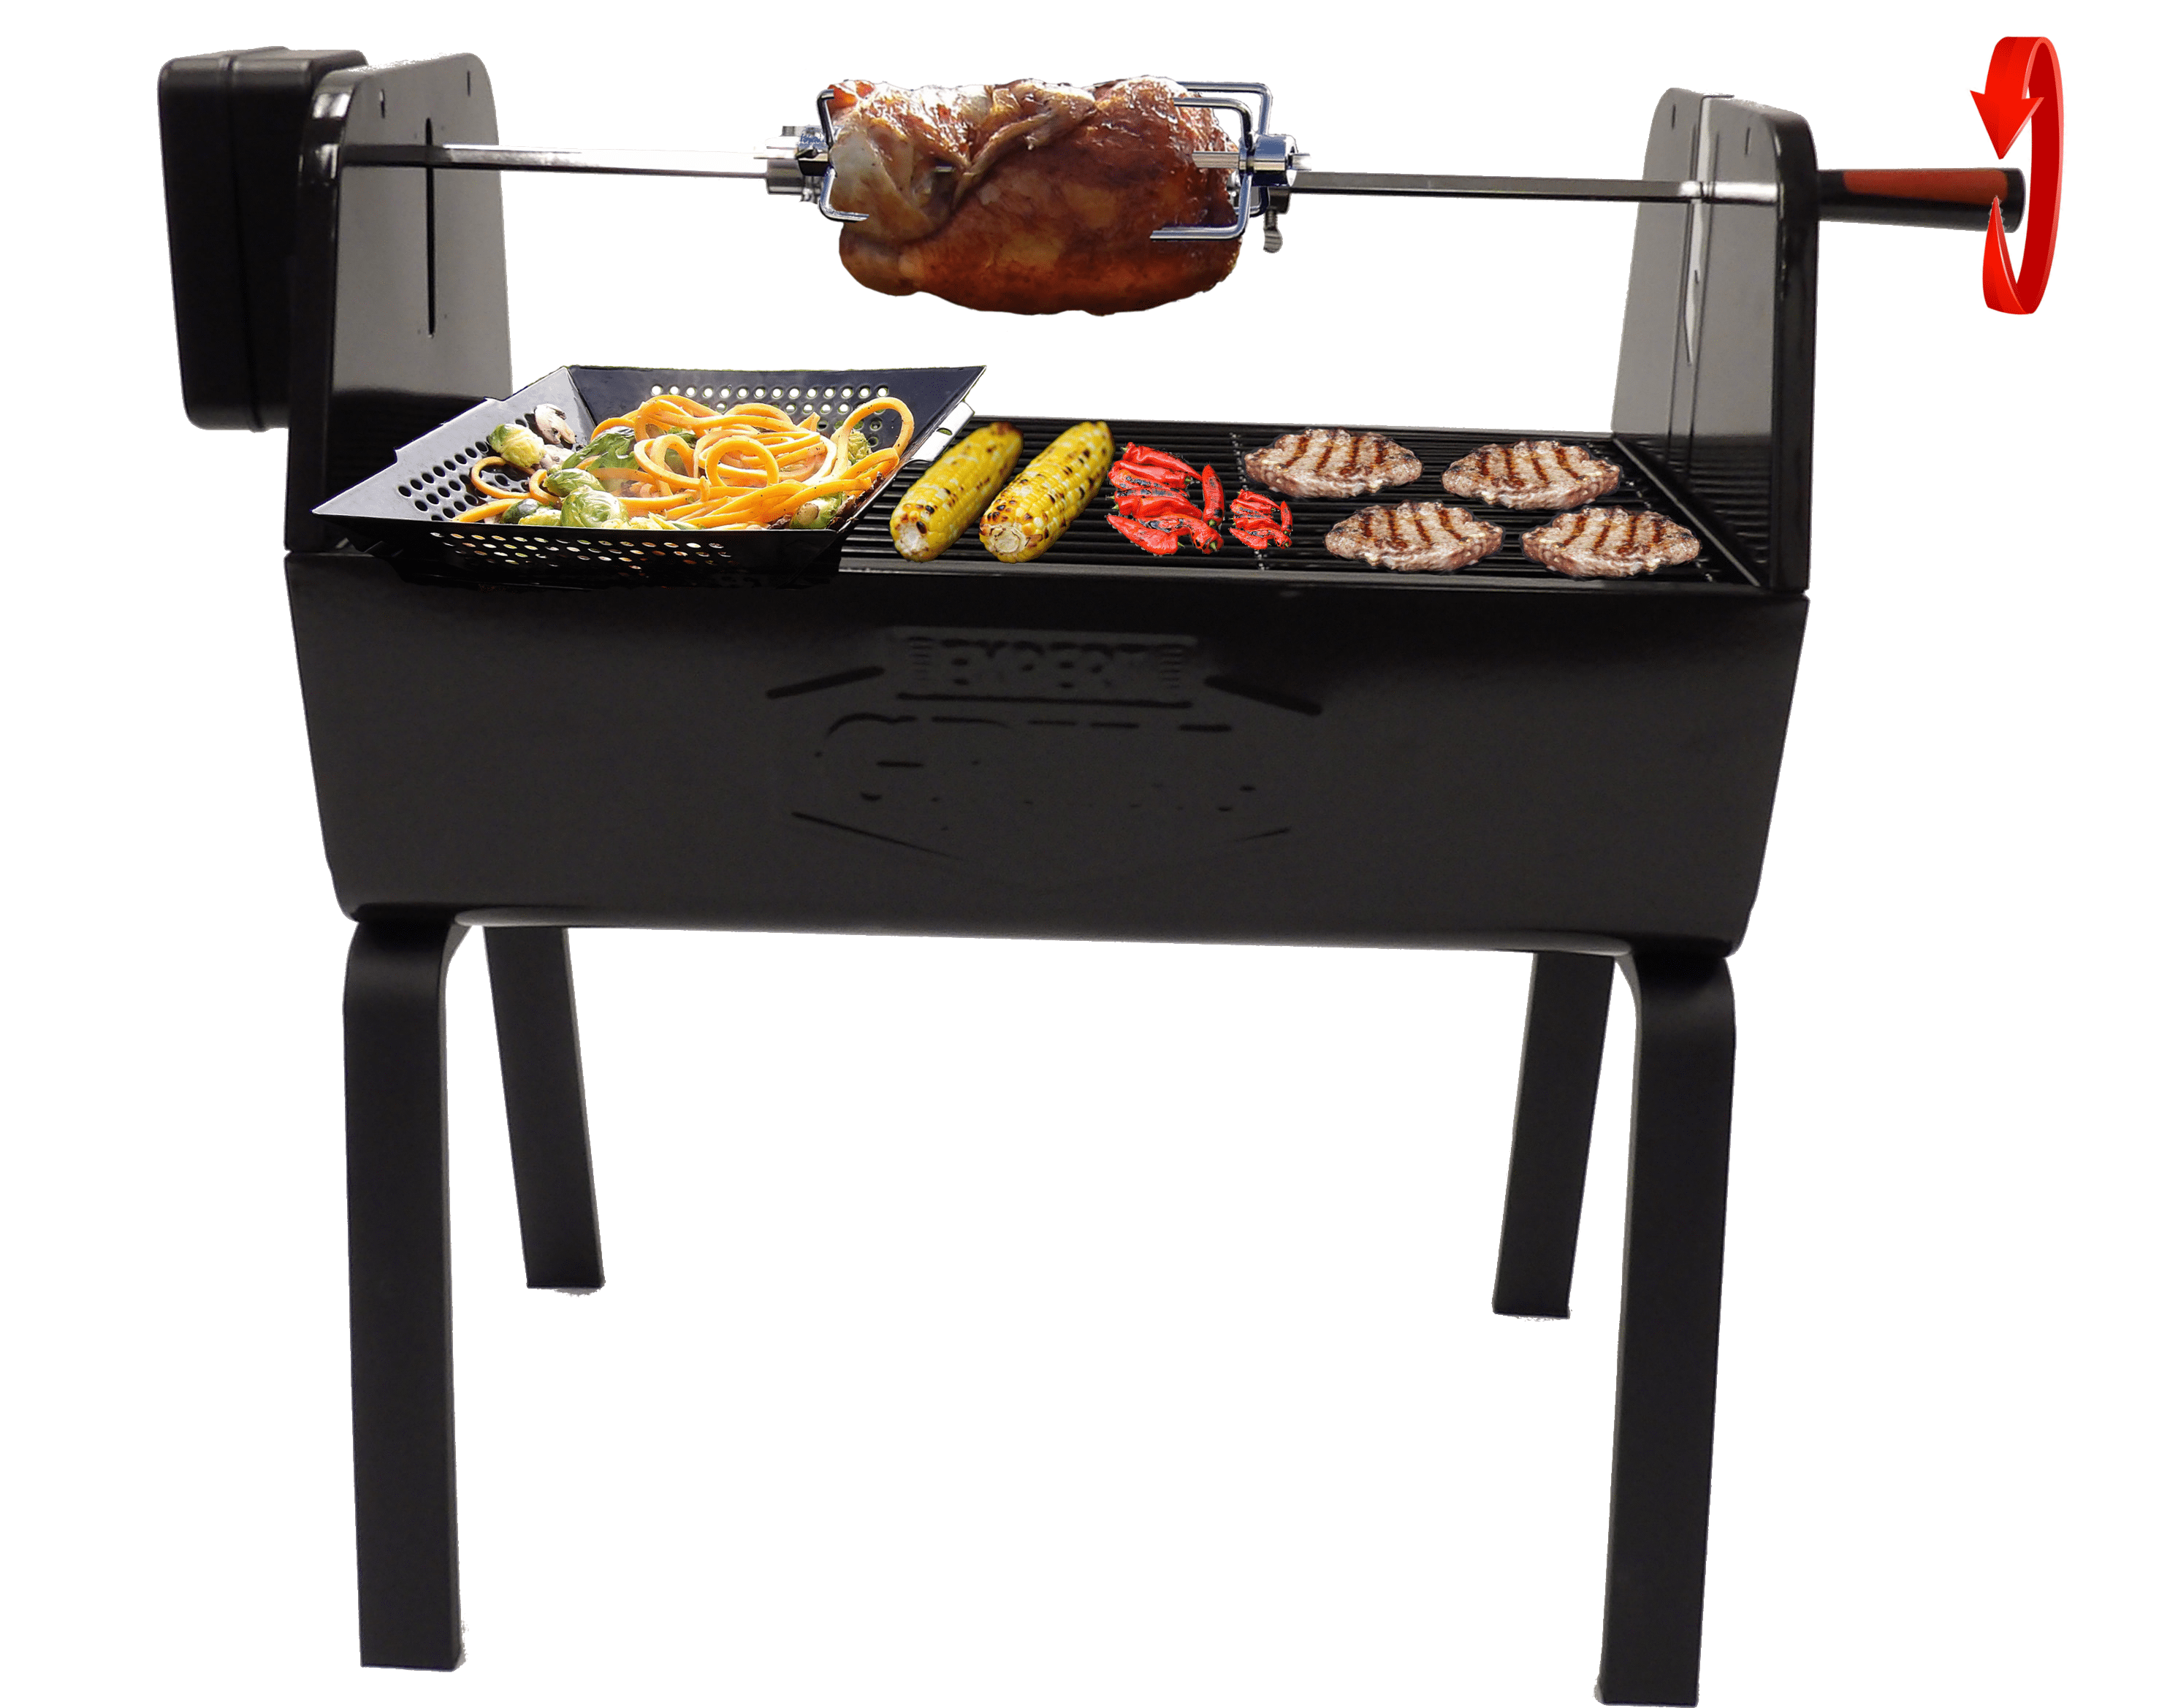 Reduced-price BBQ Supplies